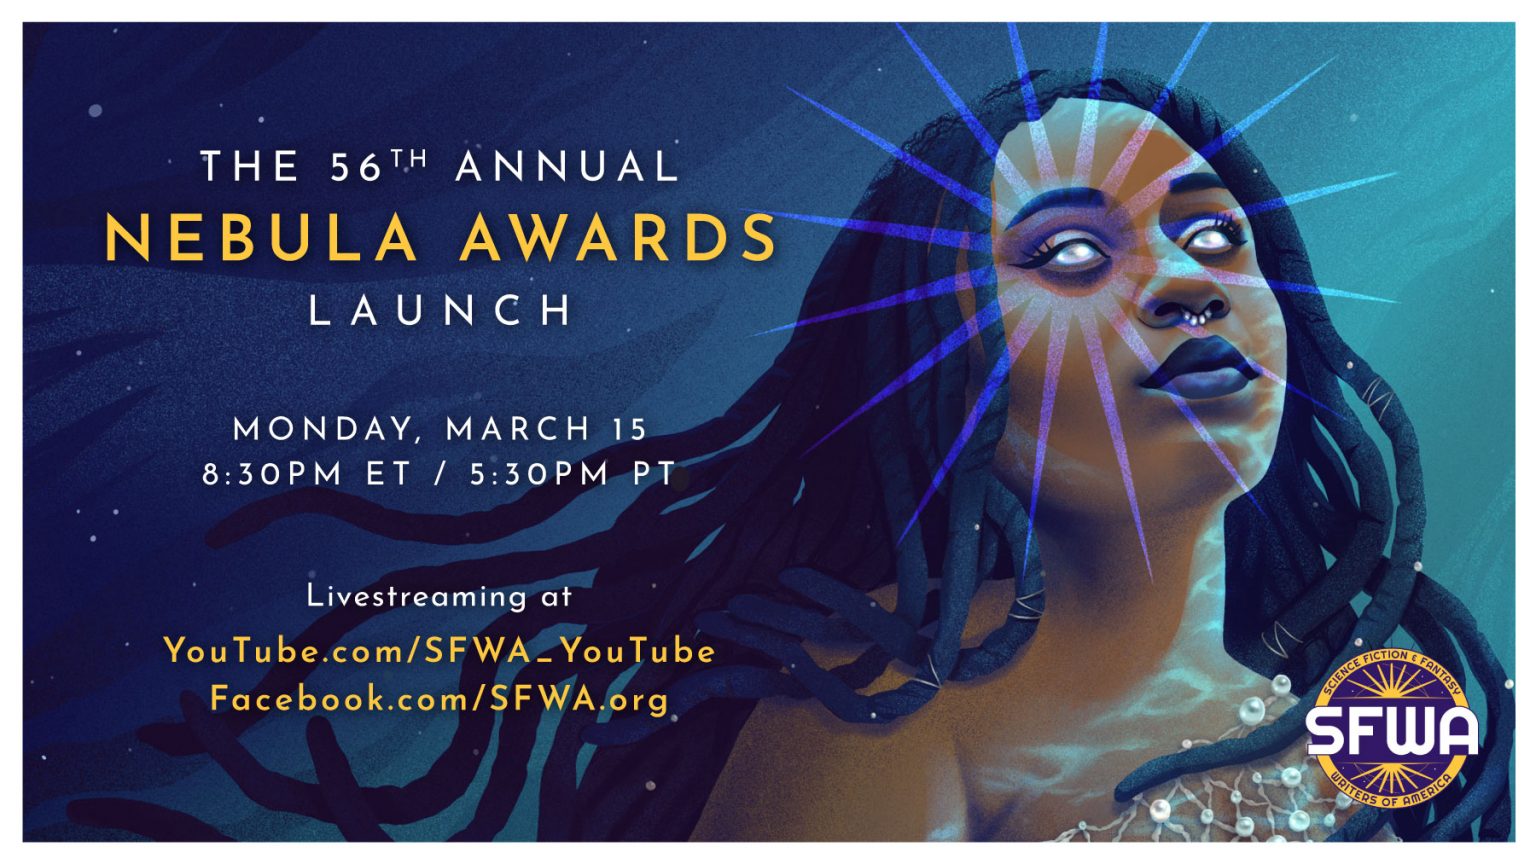 Watch the 56th Annual Nebula Awards® Launch on March 15! The Nebula